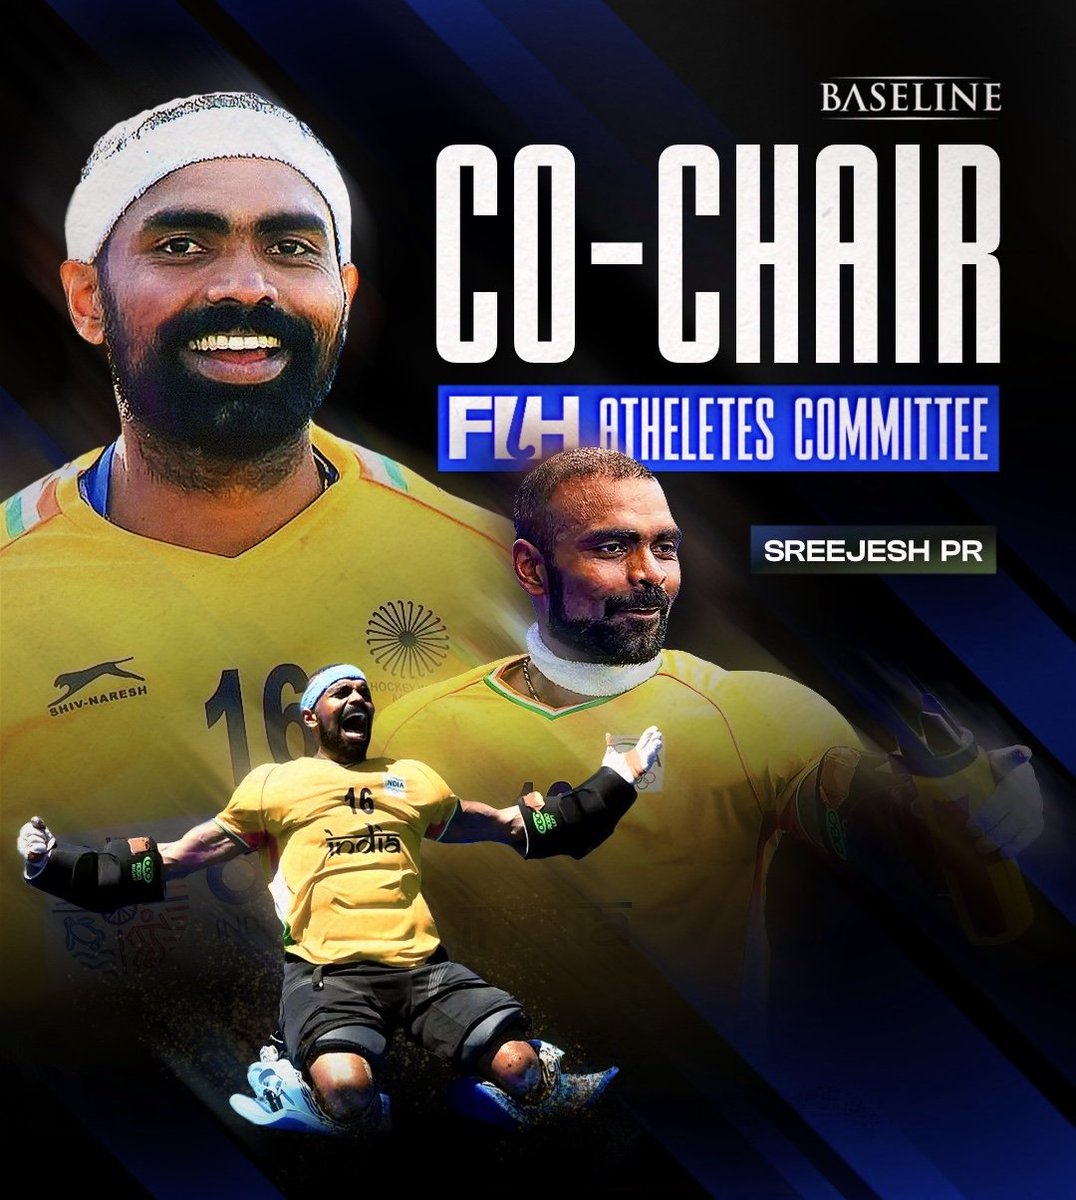 Congratulations to @16Sreejesh on being named co-chair of the FIH Athletes Committee! Your expertise and dedication will undoubtedly elevate the voice of athletes worldwide. Proud moment for Indian hockey! #TeamBaseline #Hockey